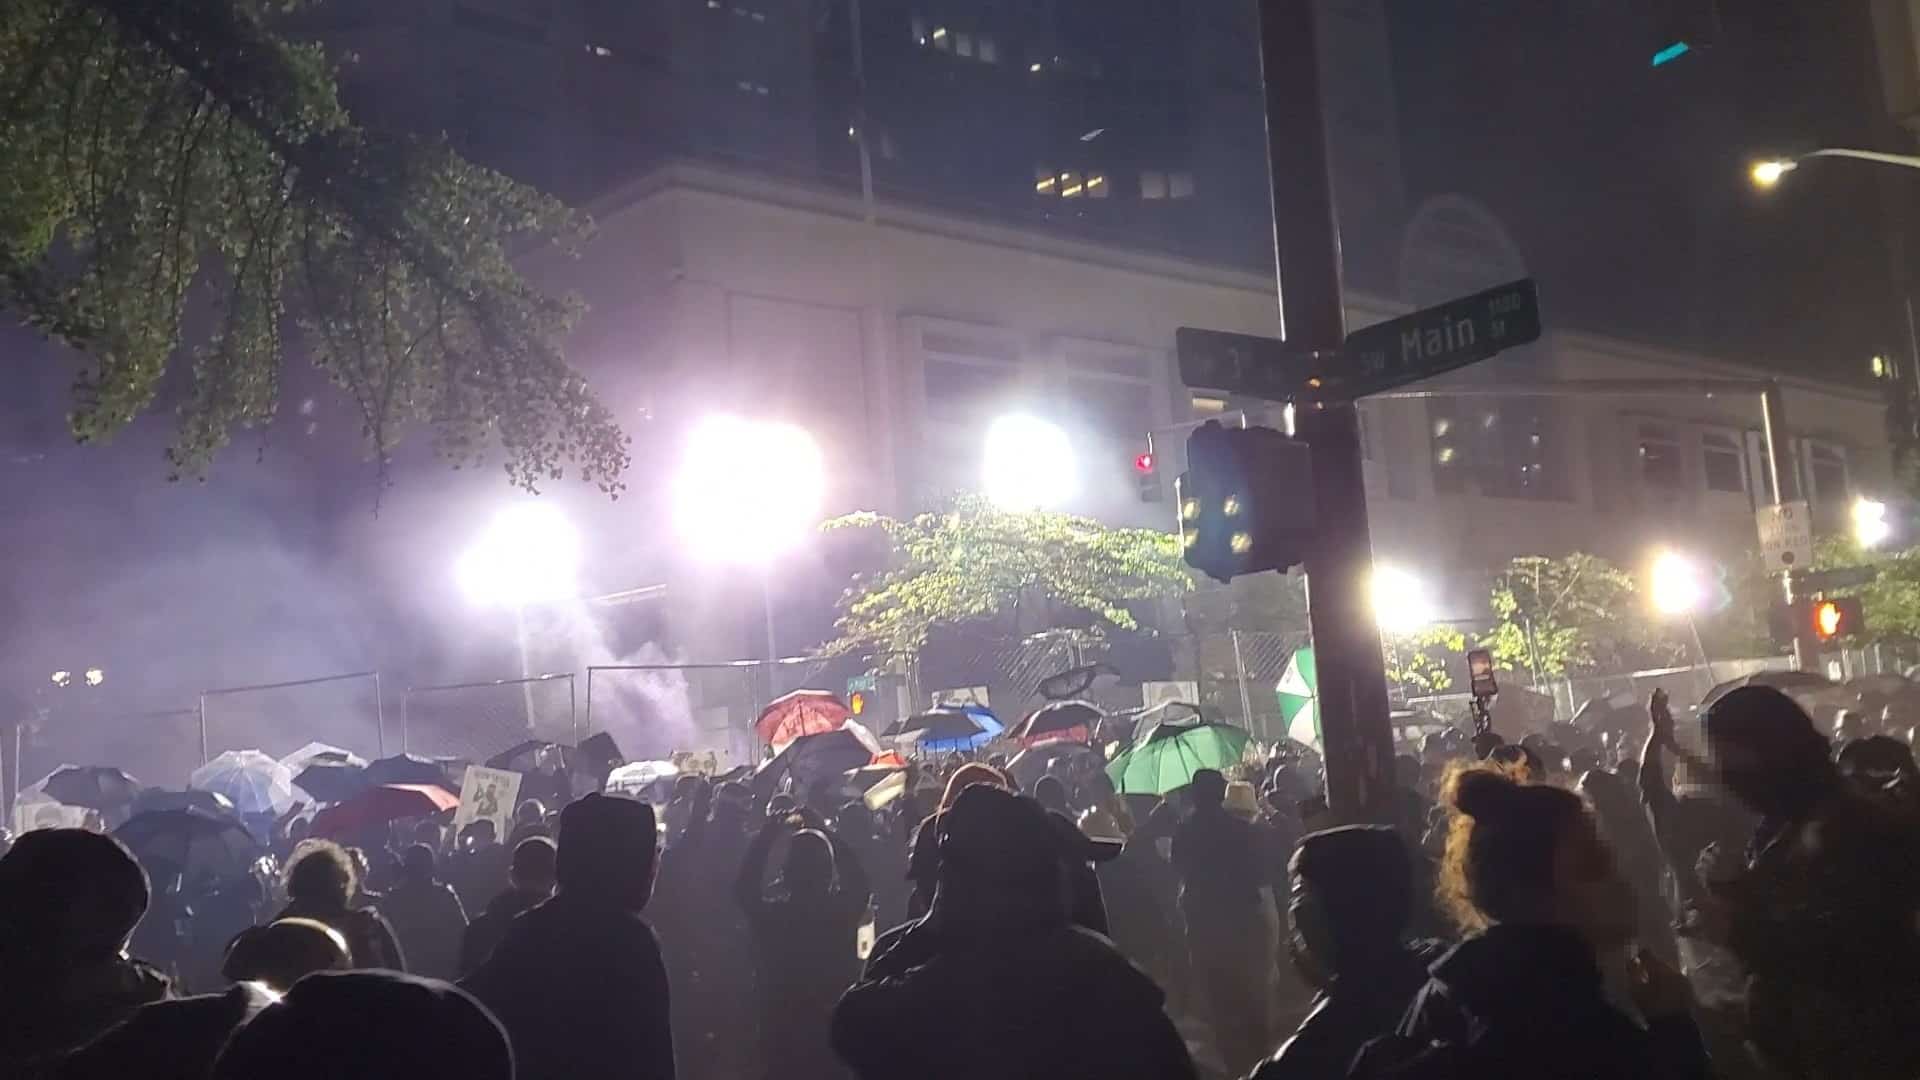 A crowd of protesters, many holding umbrellas, stand in front of the tall fencing surrounding the Justice Center at night. Blindingly bright lights shine down on them from the other side of the fence.